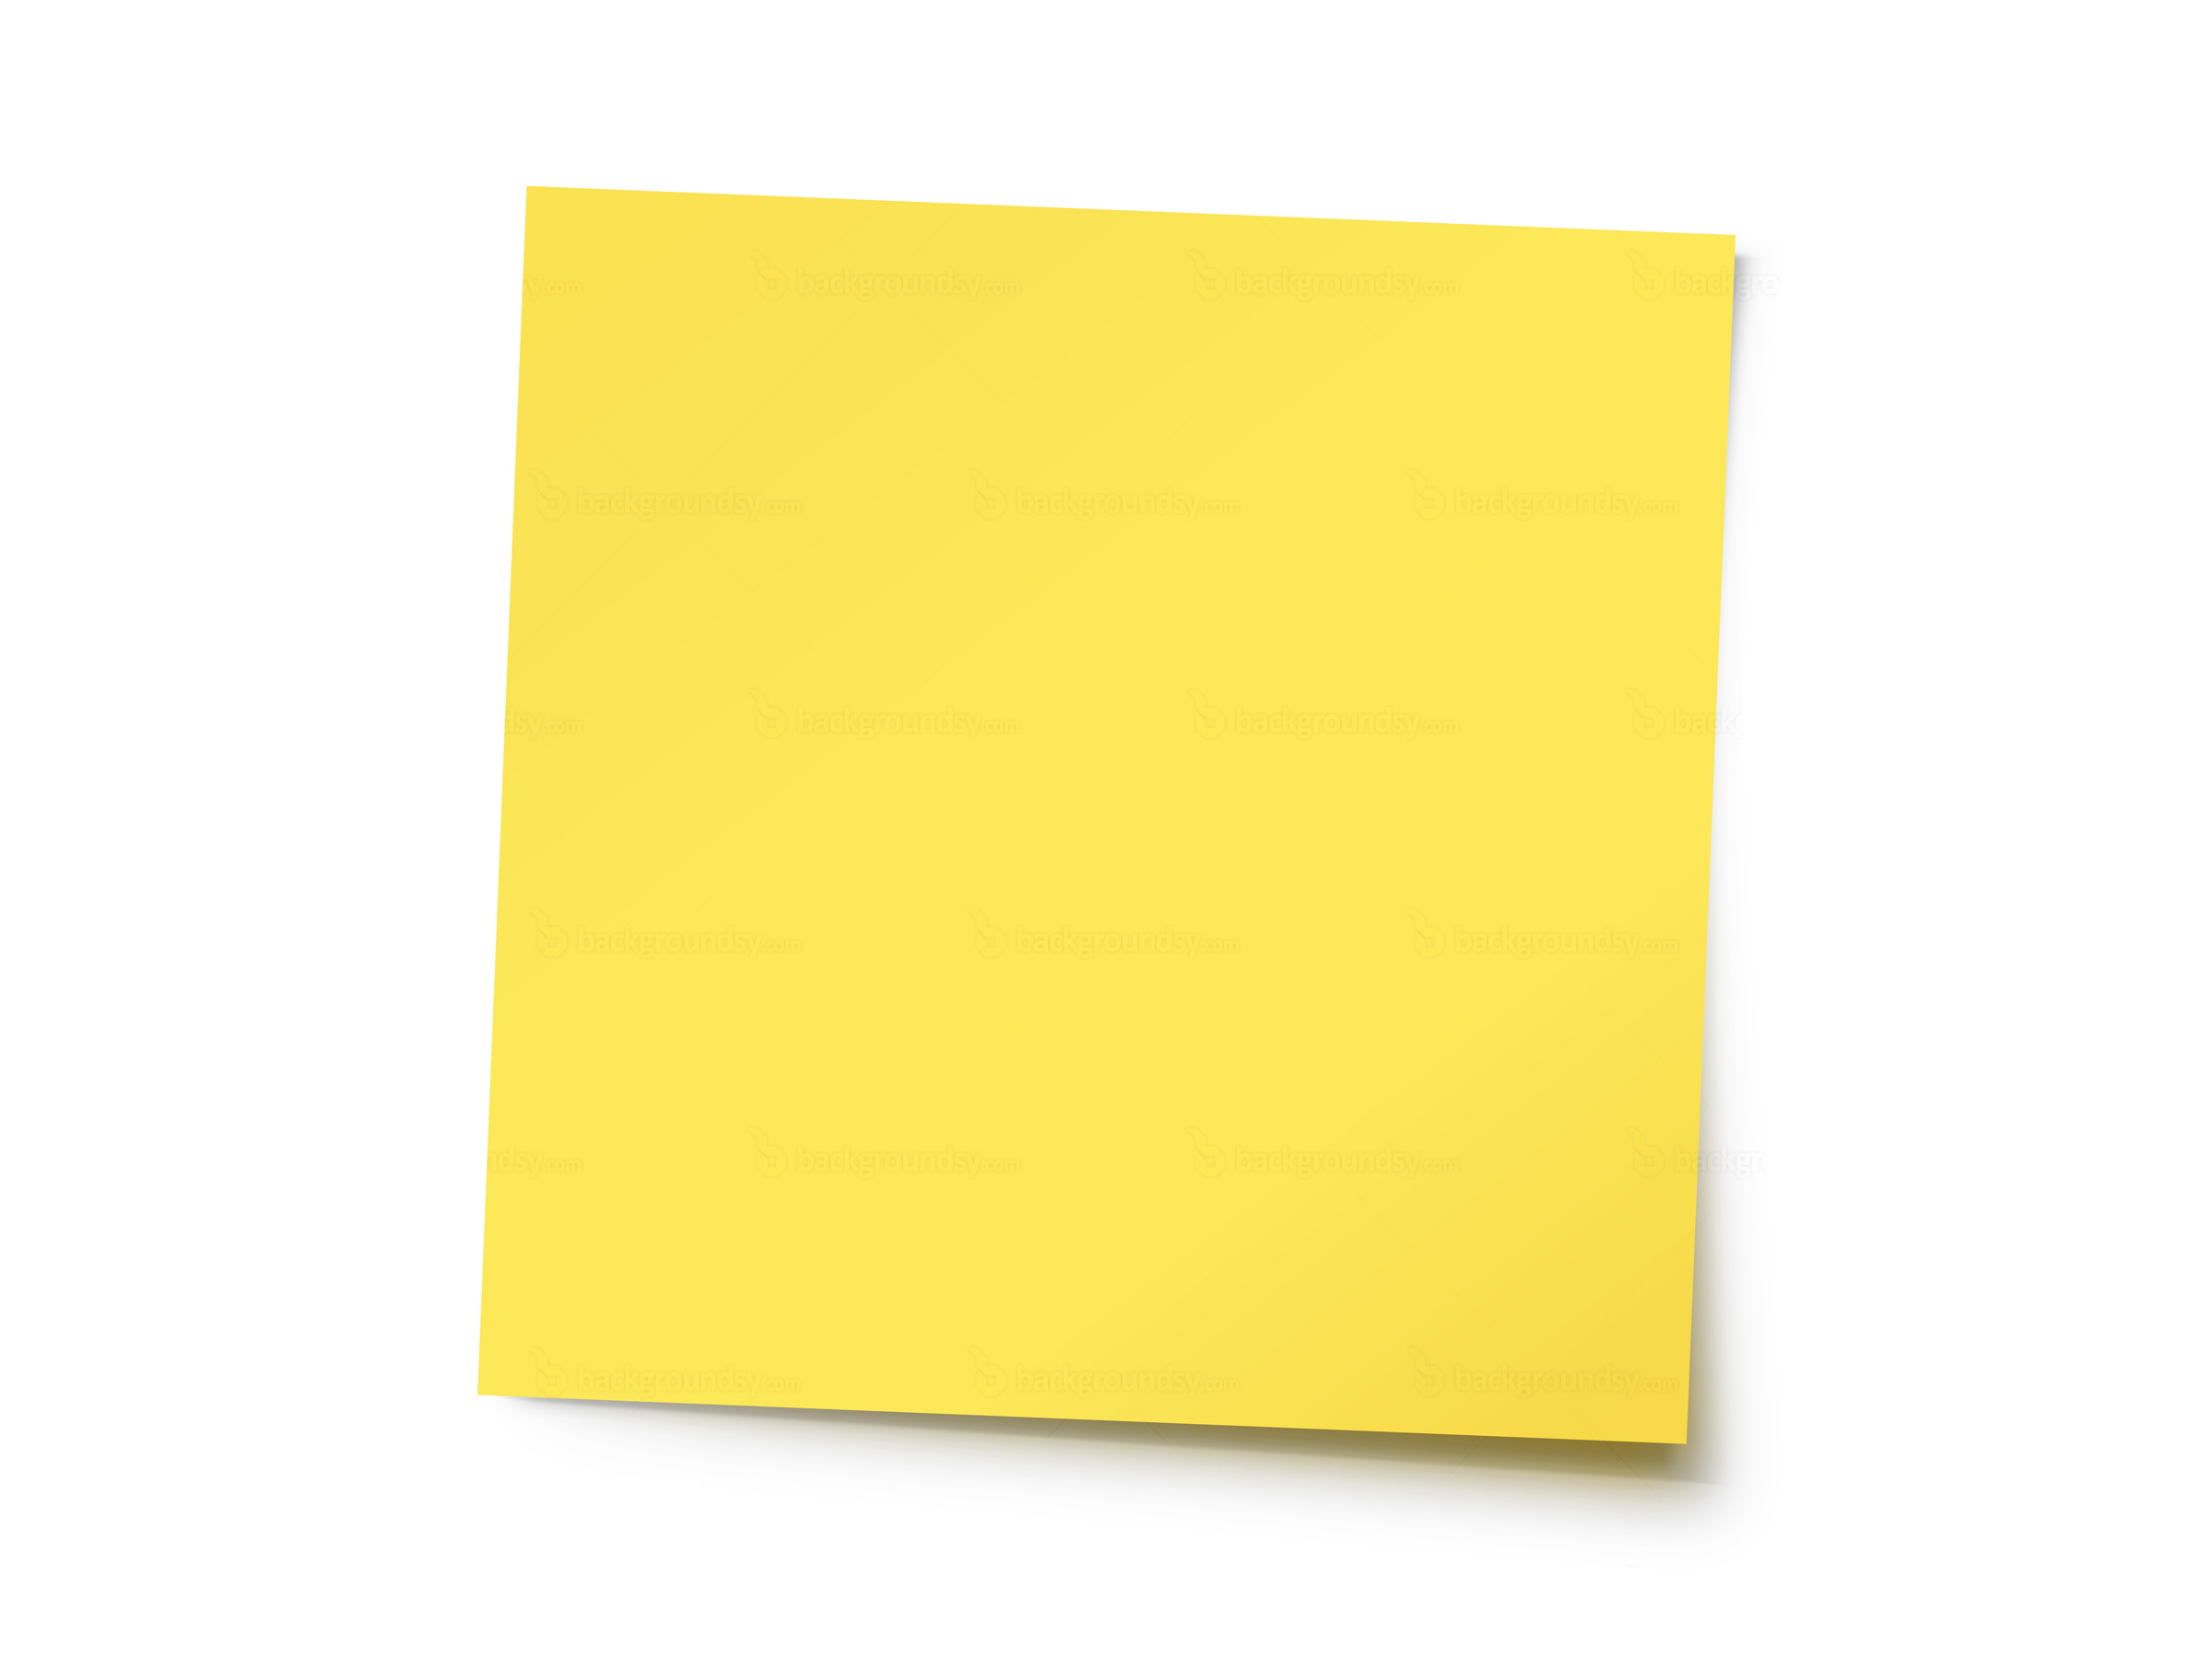 Post It Notes Clipart | Clipart library - Free Clipart Images